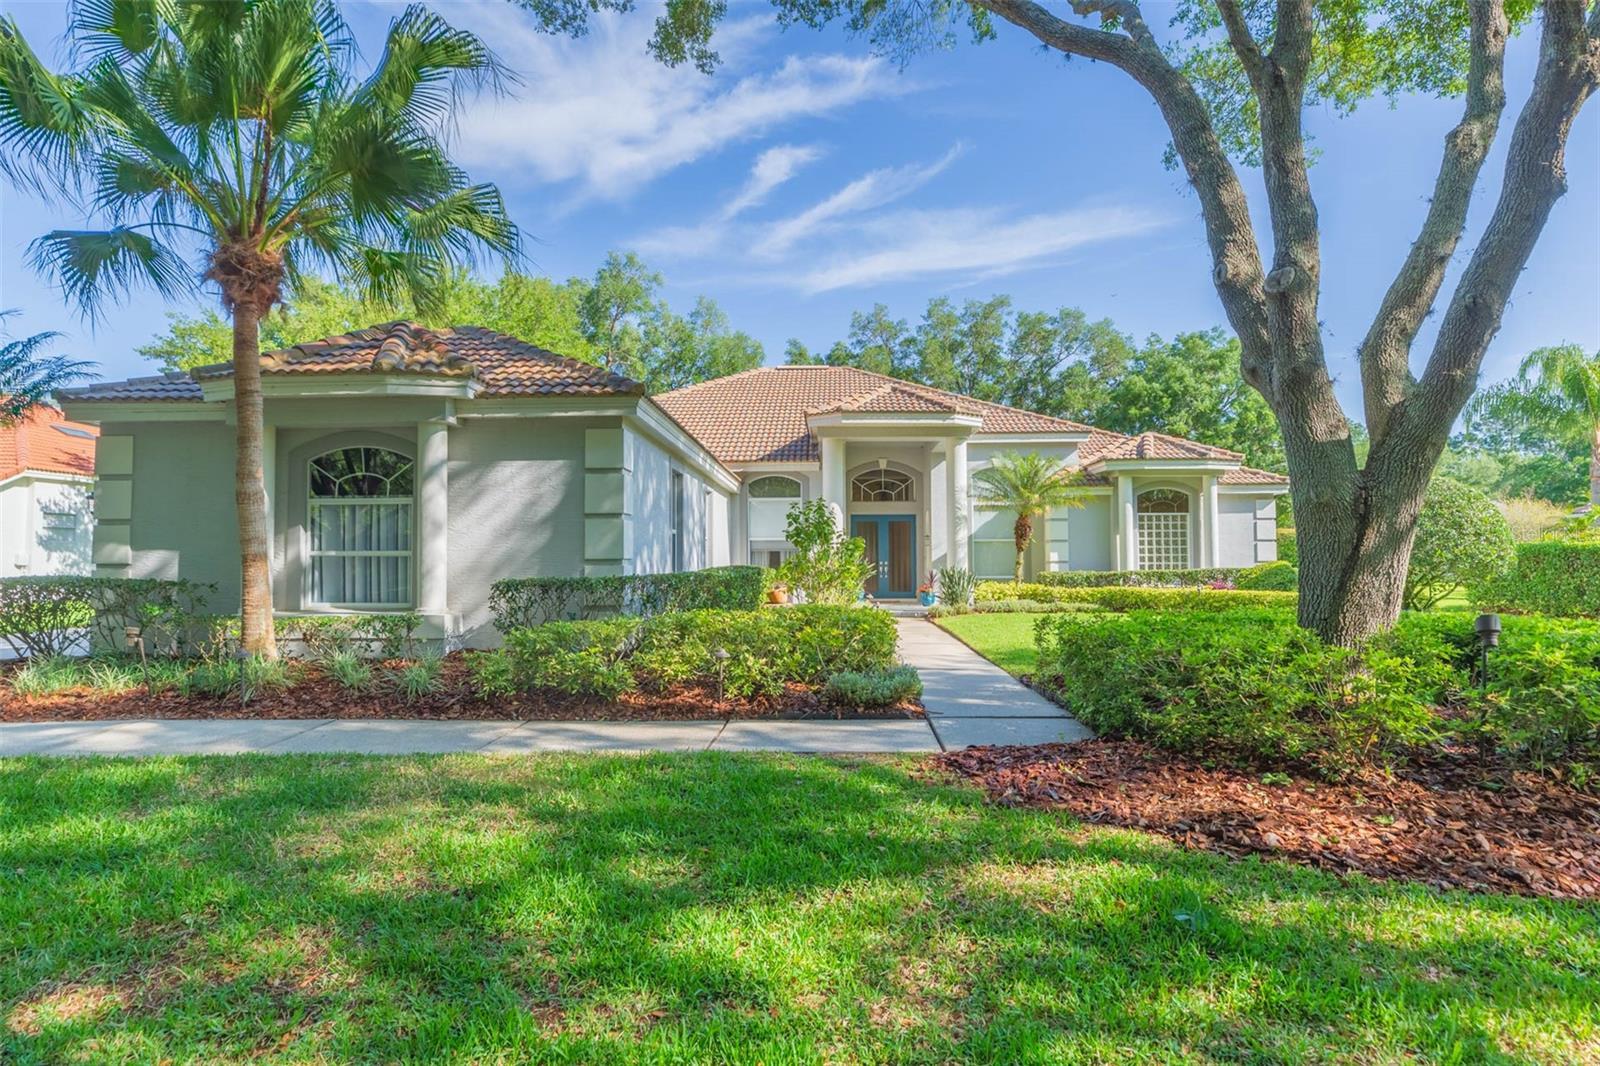 Photo one of 8953 Magnolia Chase Cir Tampa FL 33647 | MLS T3514195